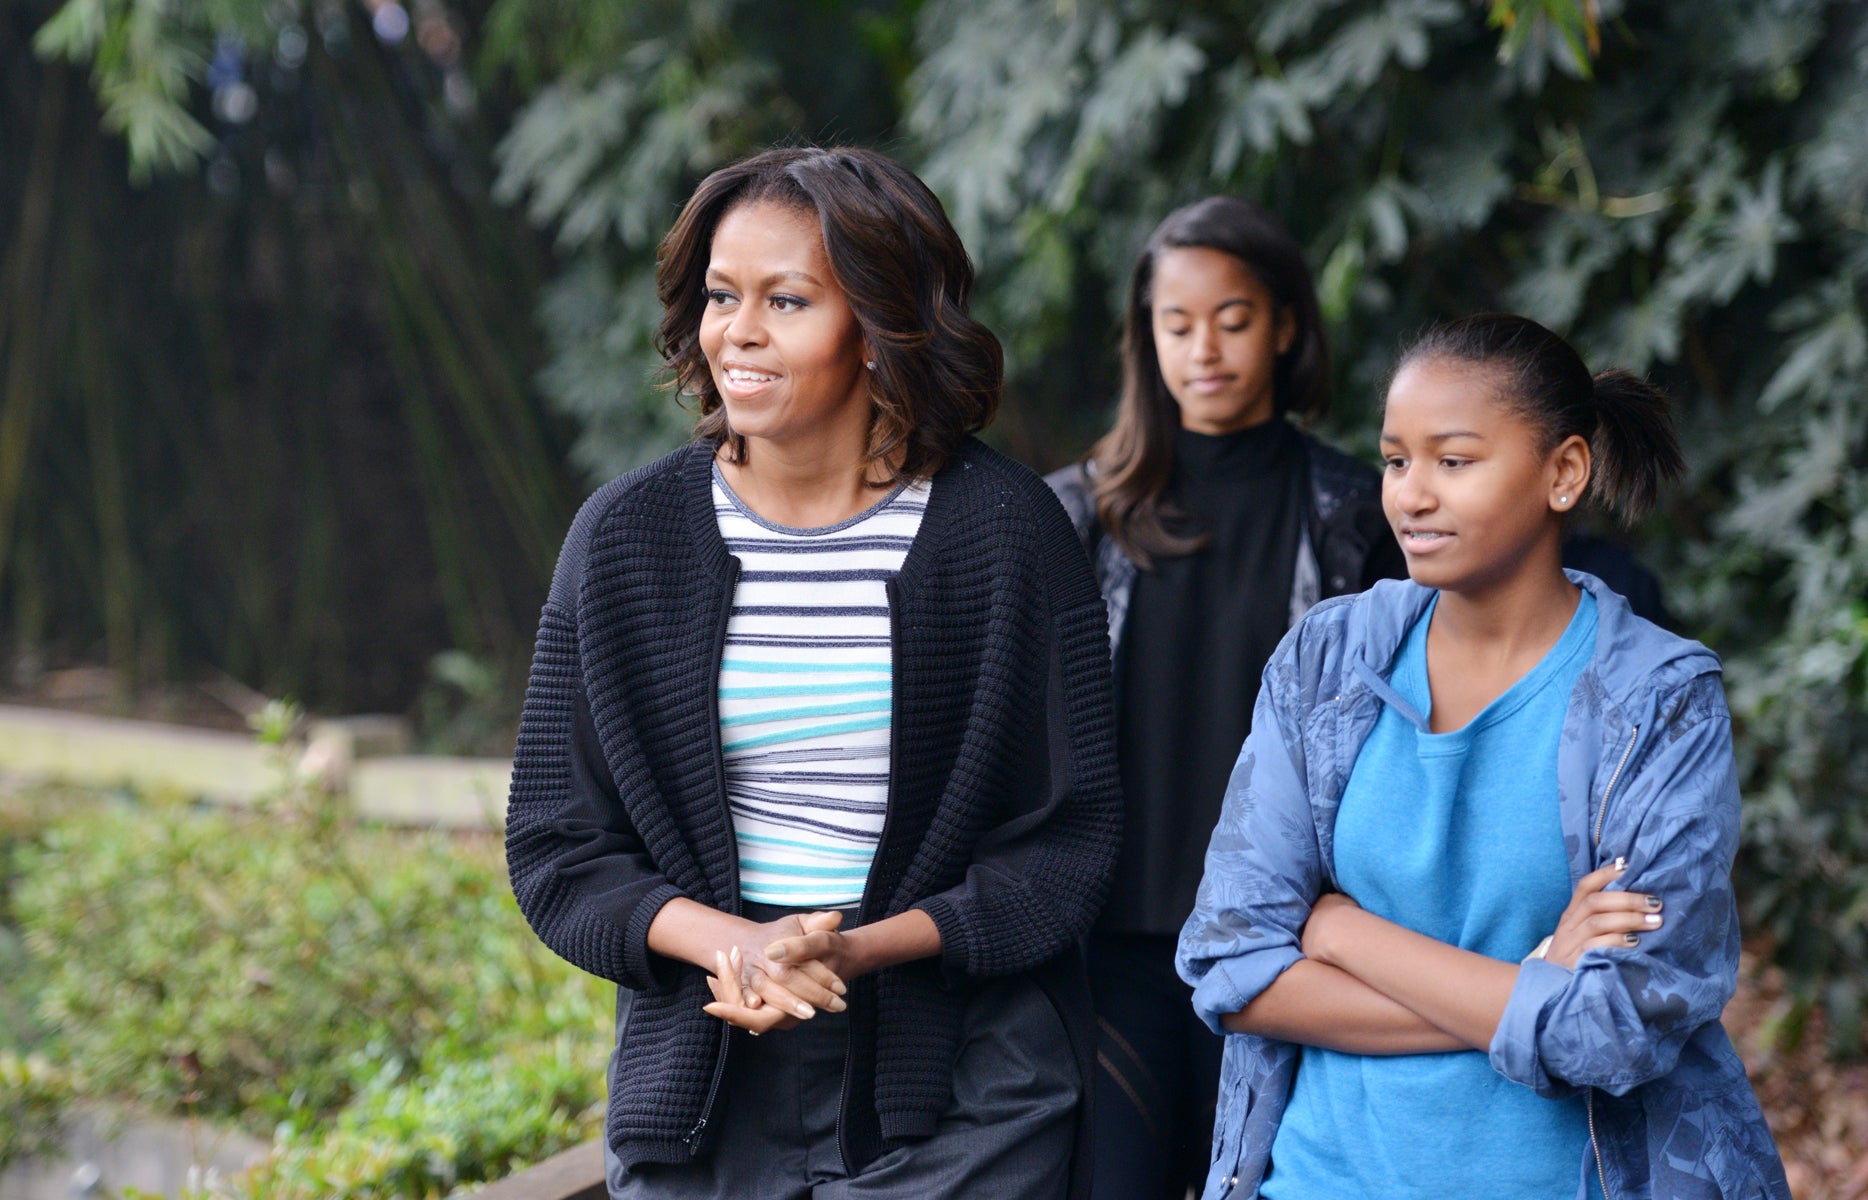 PHOTOS: Michelle Obama and Daughters’ China Visit